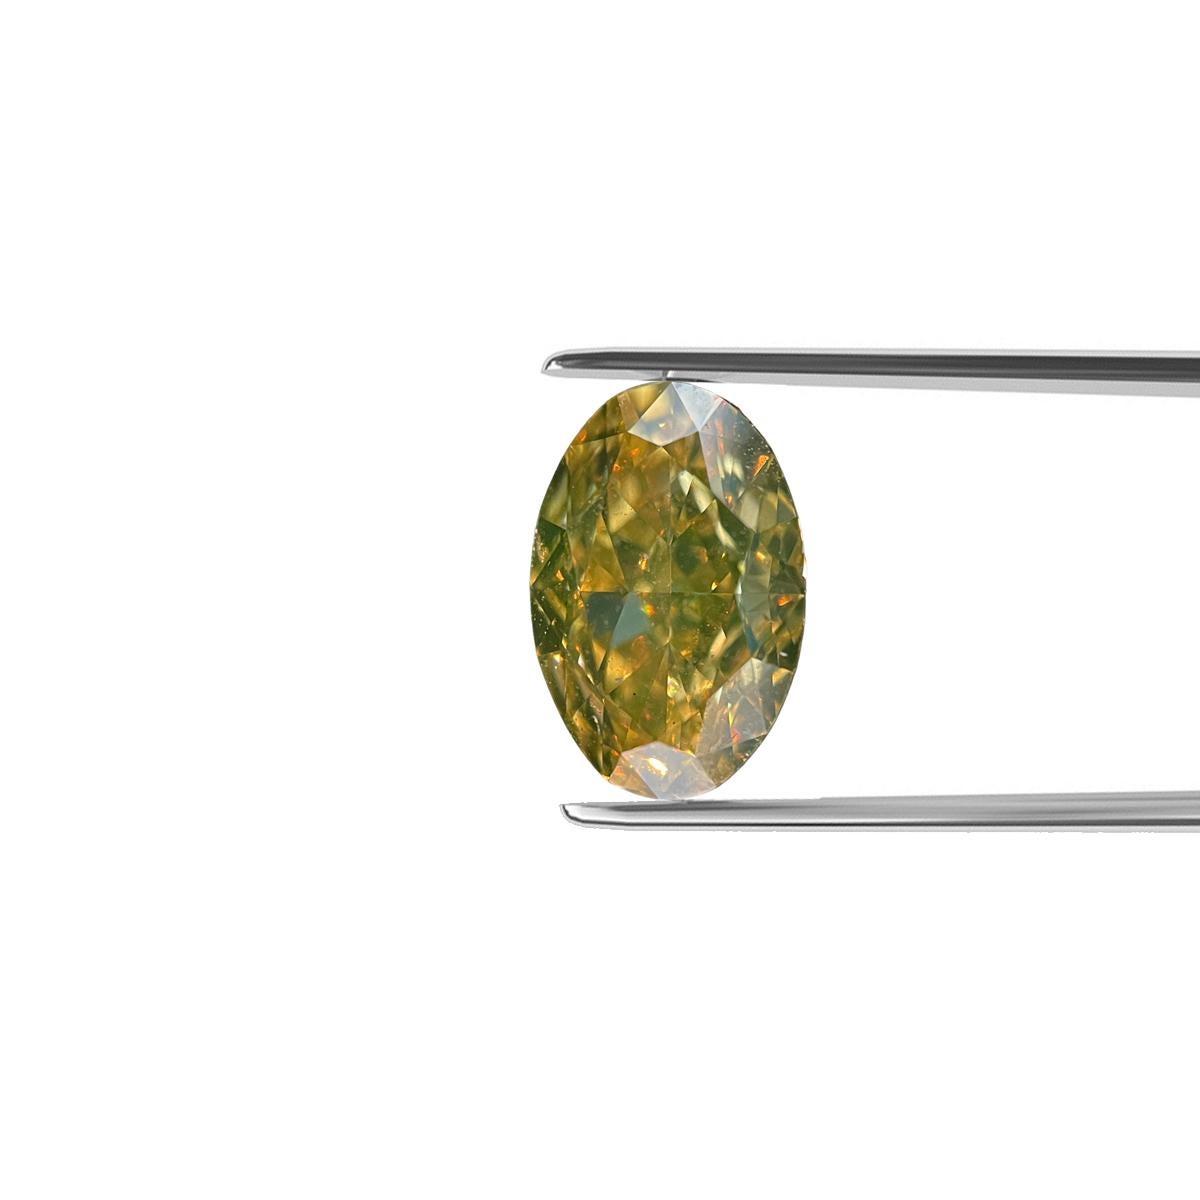 ITEM DESCRIPTION

ID #: NYC56661
Stone Shape:	OVAL MODIFIED BRILLIANT
Diamond Weight:	1.76 CT
Color:	FANCY BROWNISH ORANGY YELLOW
Cut:	Excellent
Measurements: 8.99X6.08X4.05 mm
Symmetry: Excellent
Polish: Excellent
Fluorescence: None
Certifying Lab: